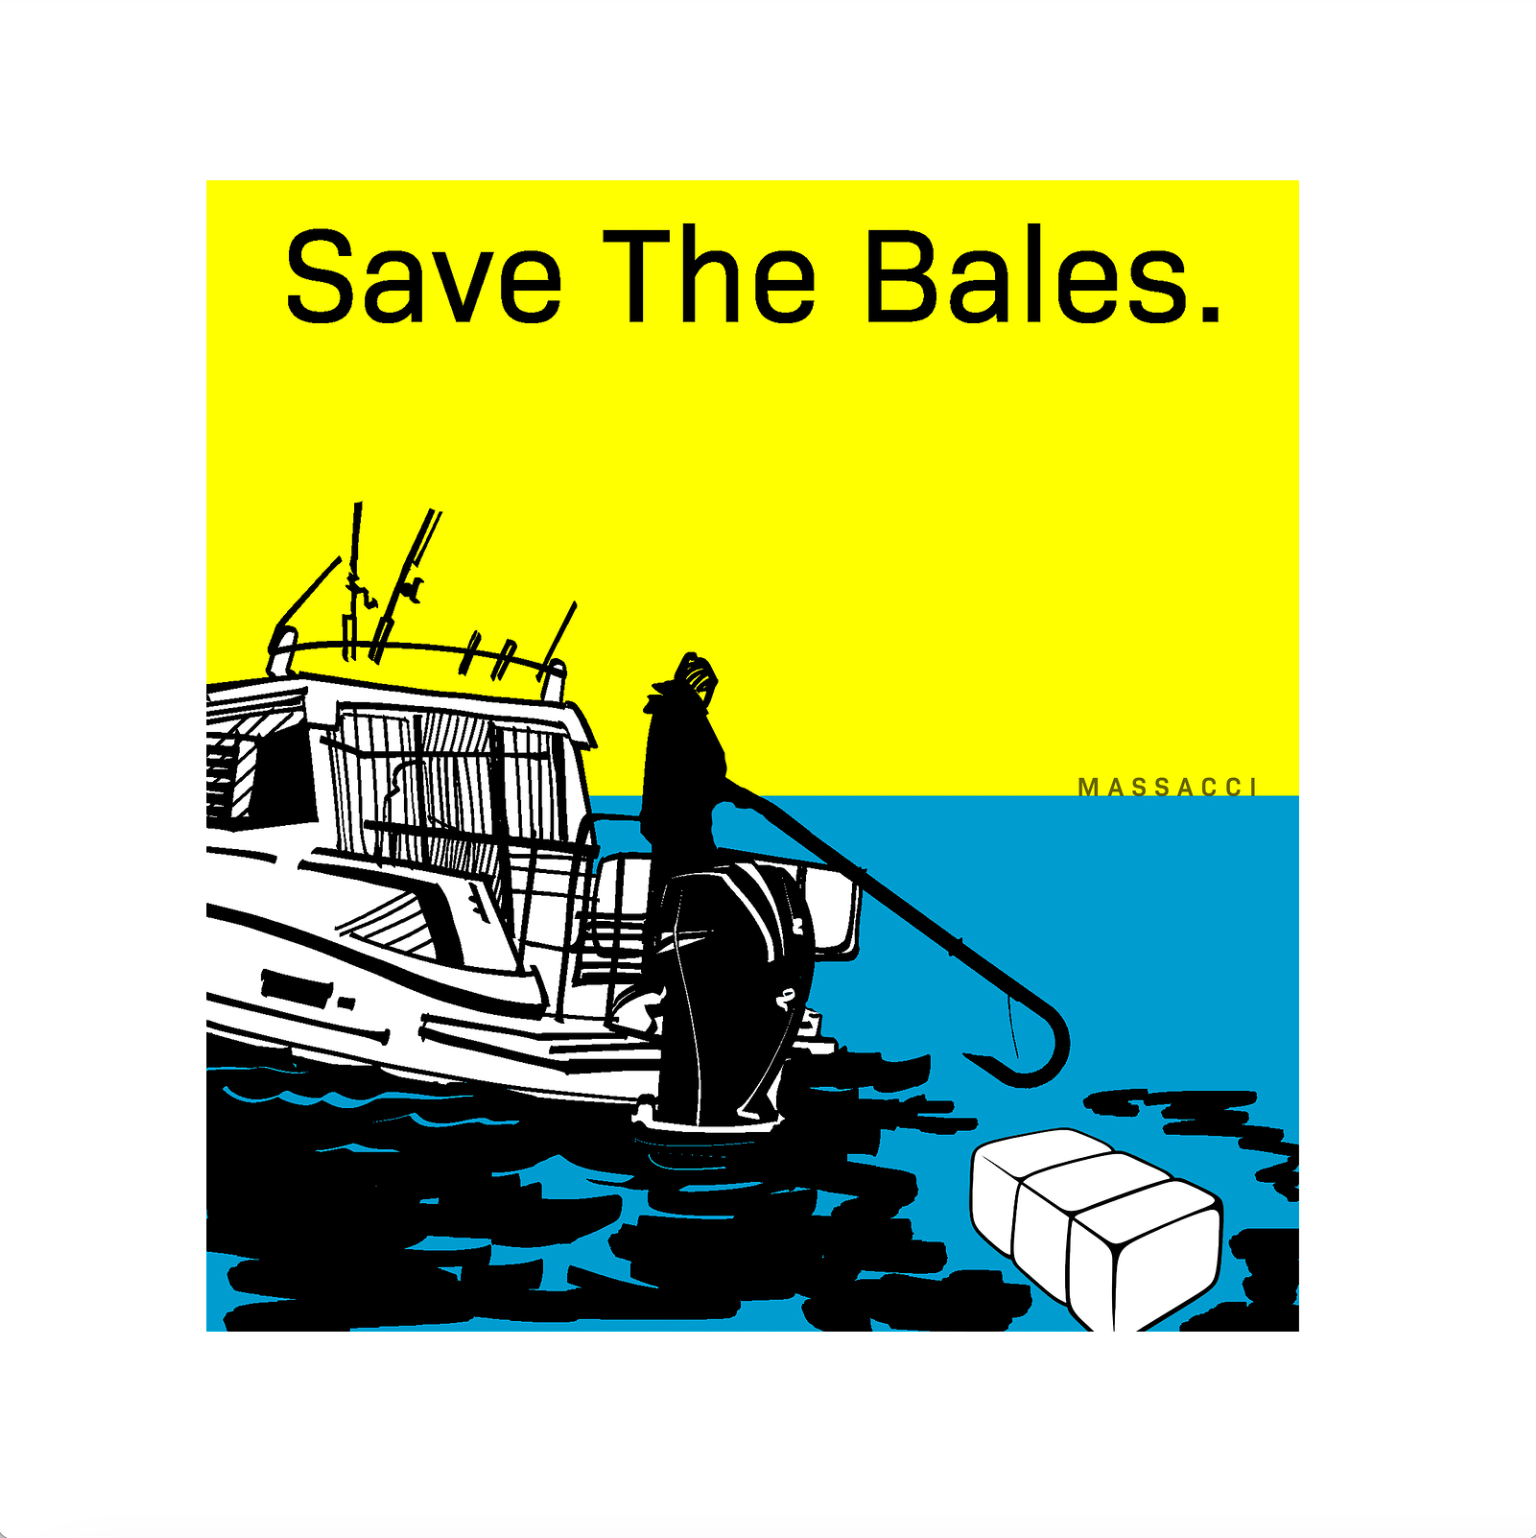 Save The Bales